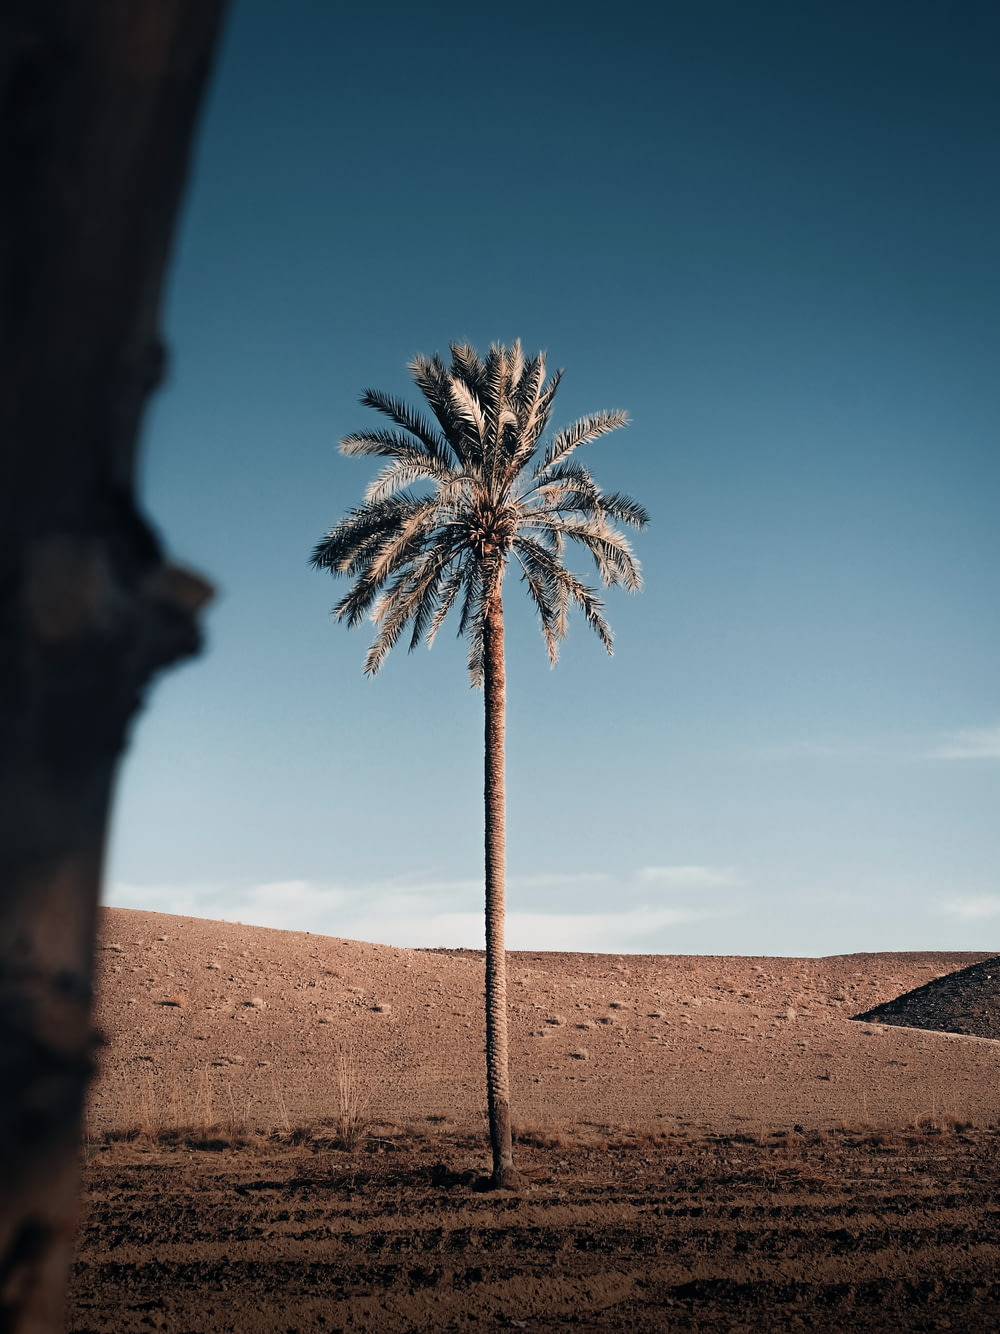 a palm tree in a desert